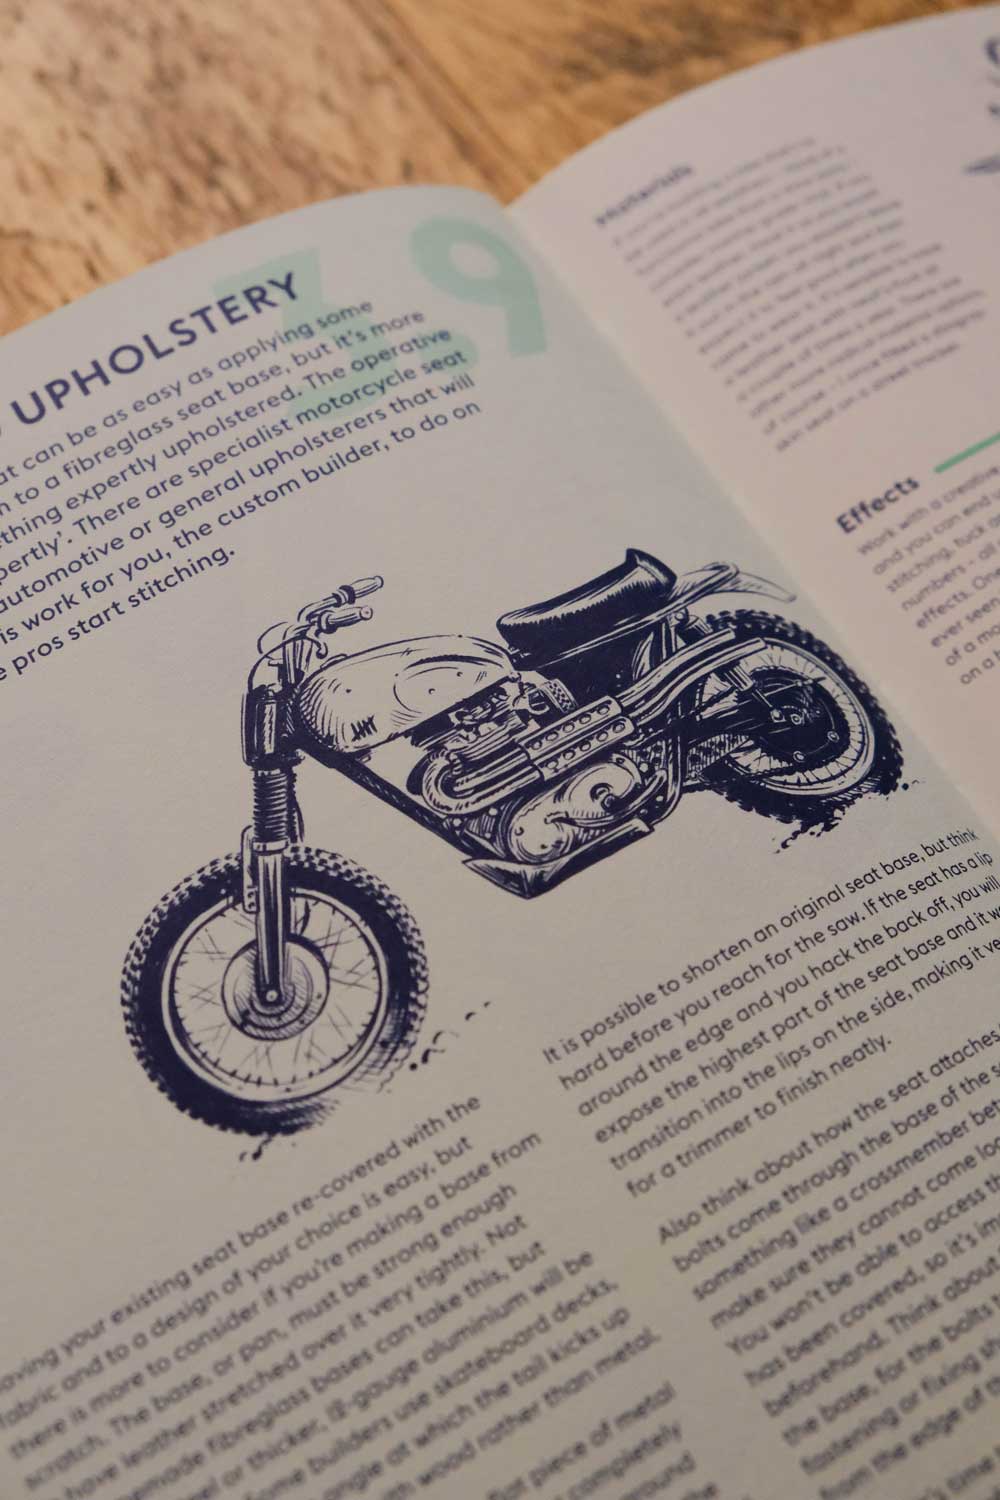 How To Build a Motorcycle illustrated book